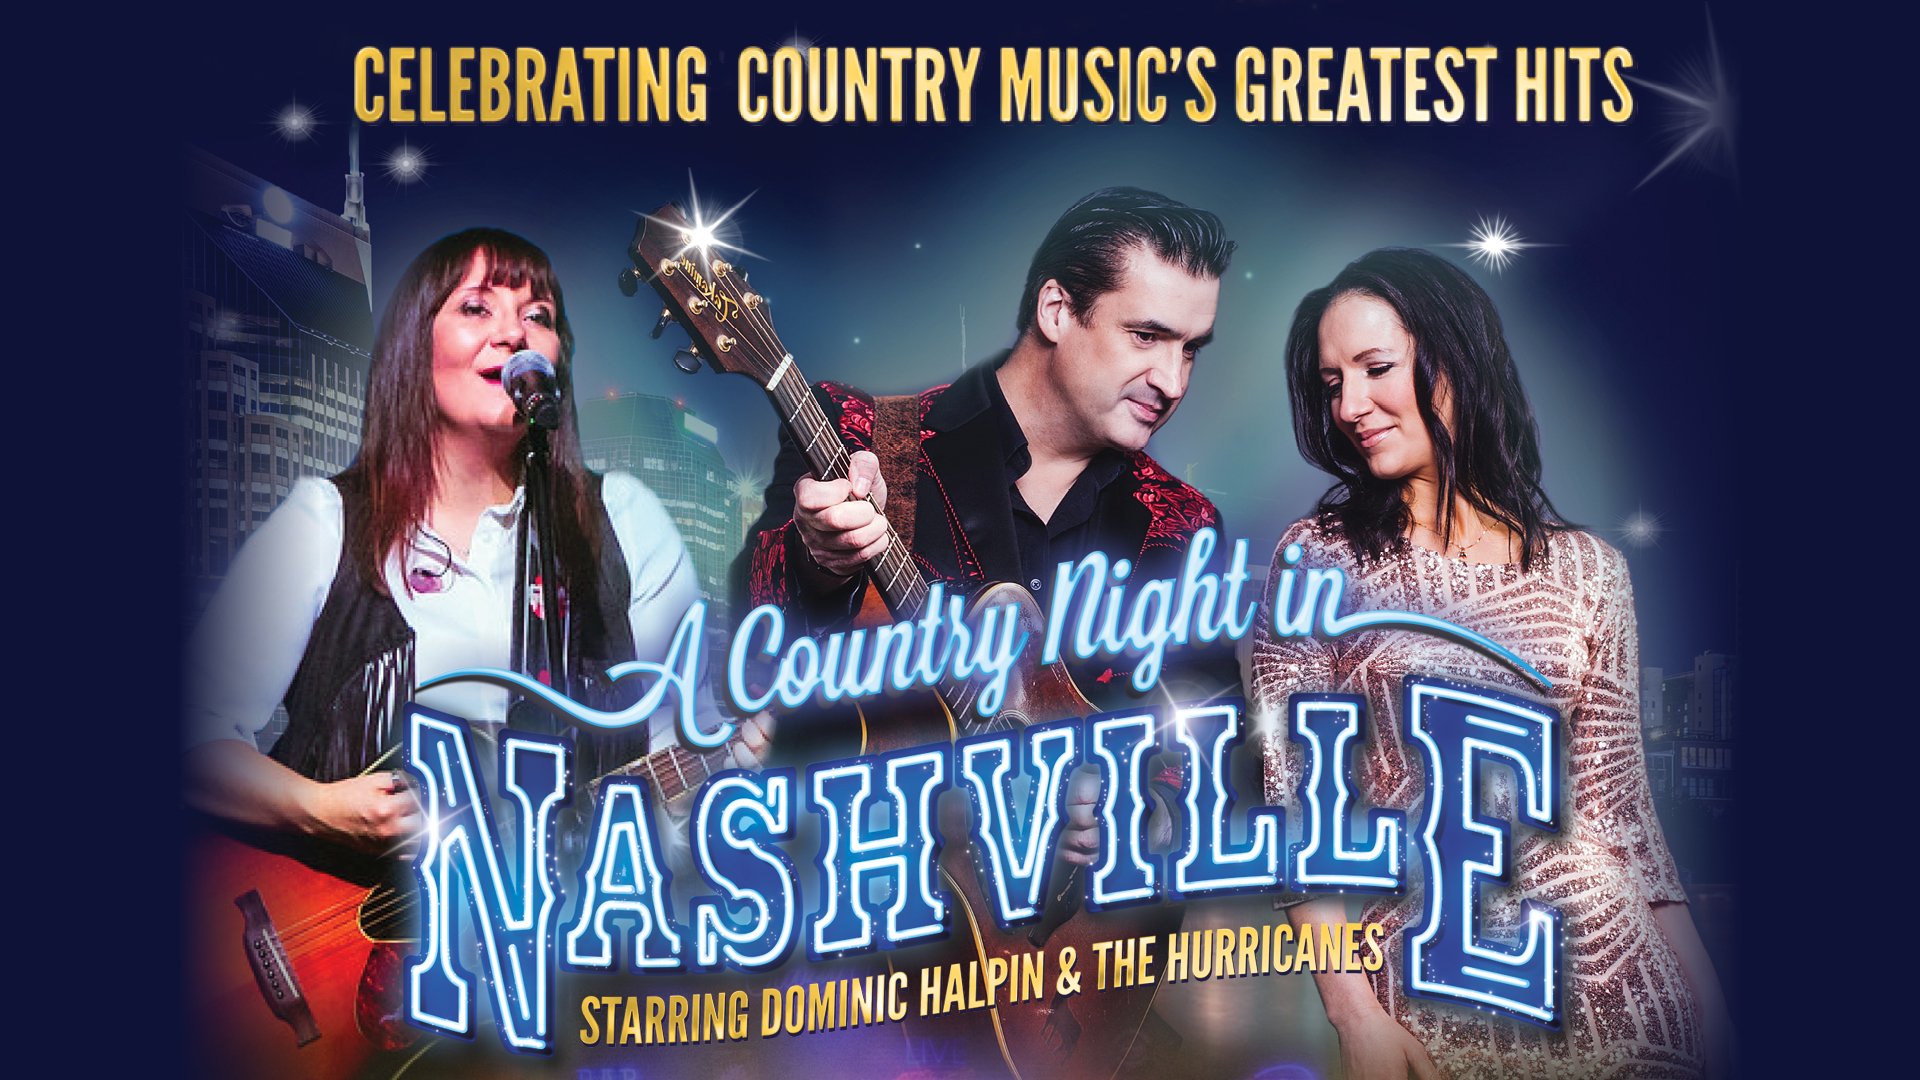 A Country Night in Nashville Top Image